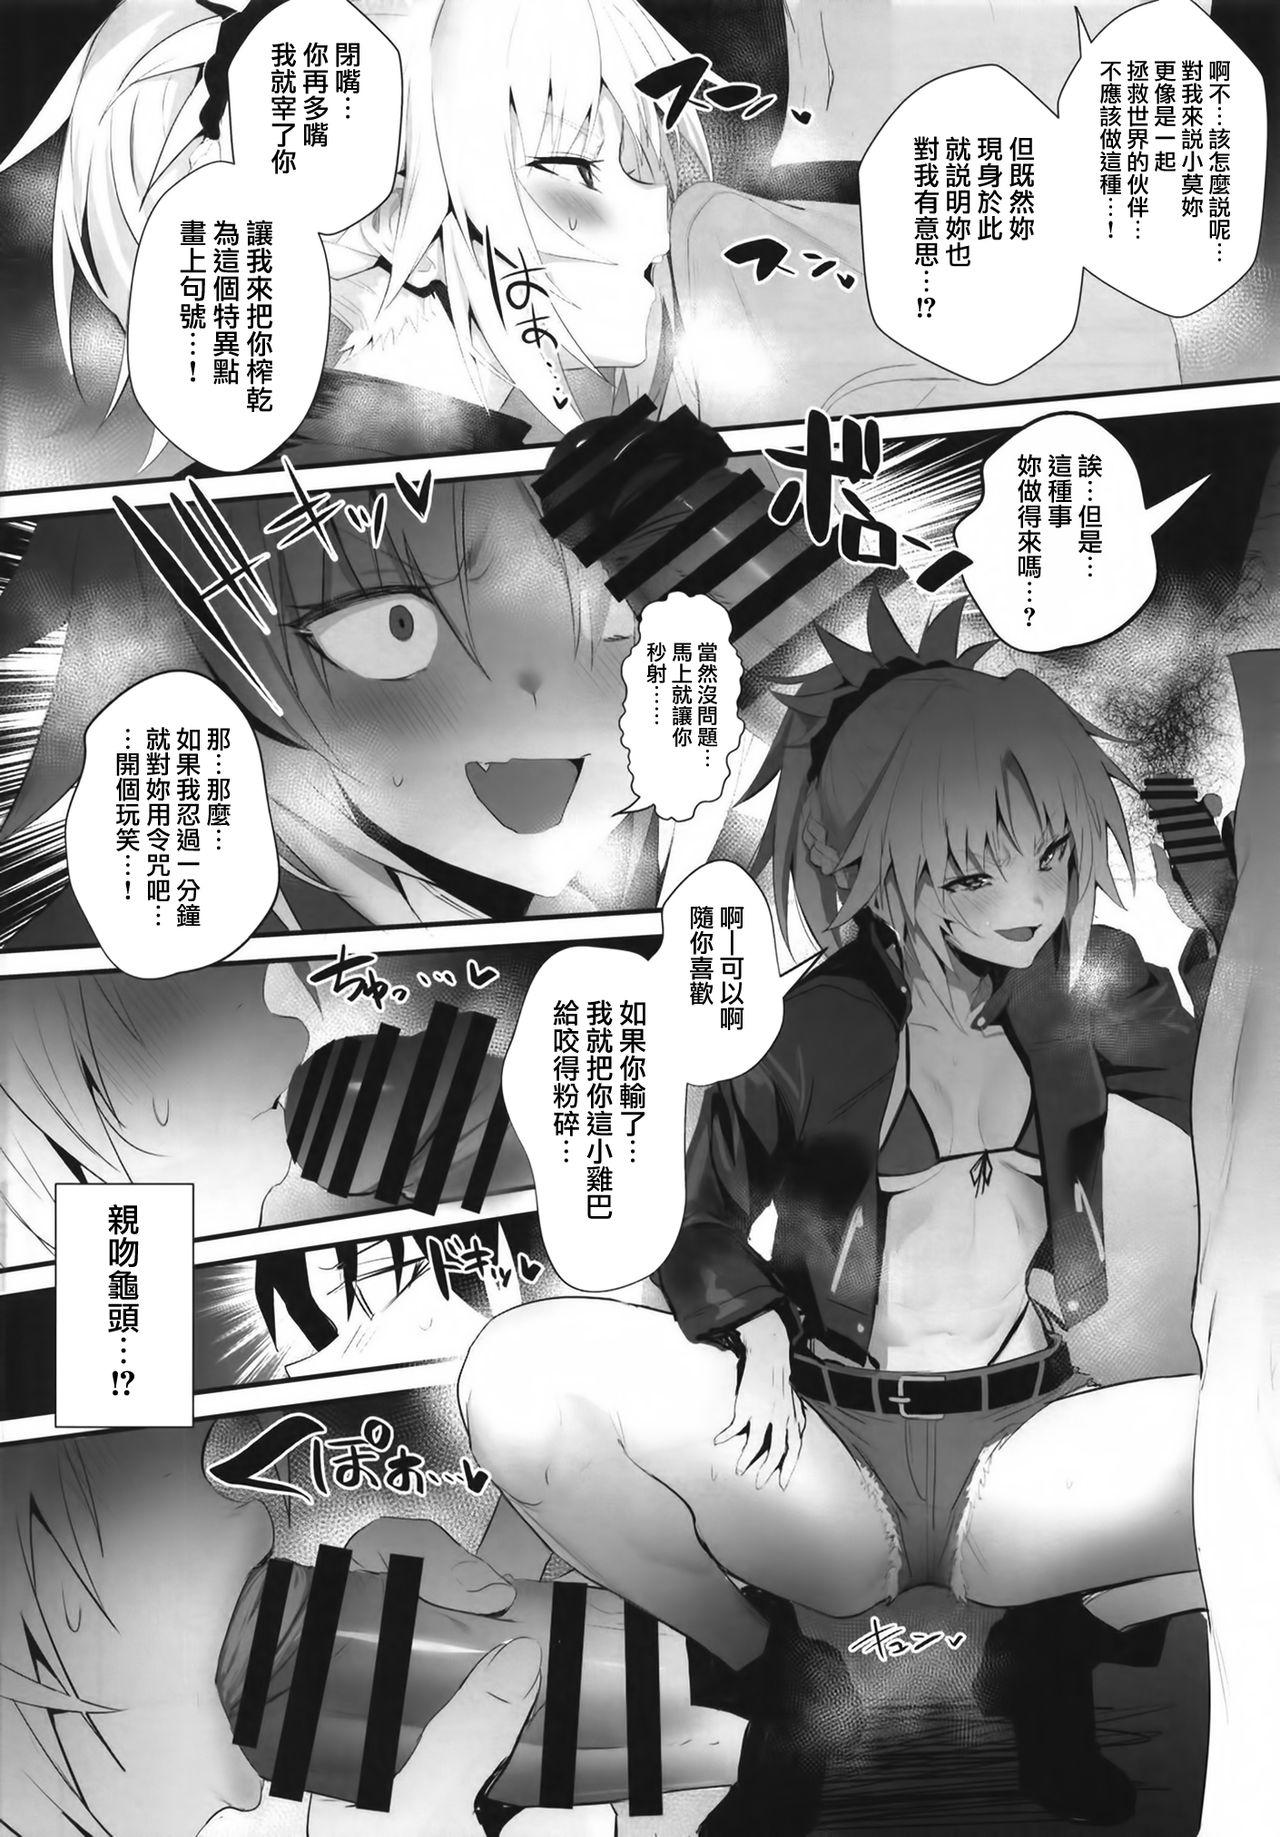 Clothed Sex SUKEBE Order VOL. 02 - Fate grand order Free Amateur Porn - Page 4